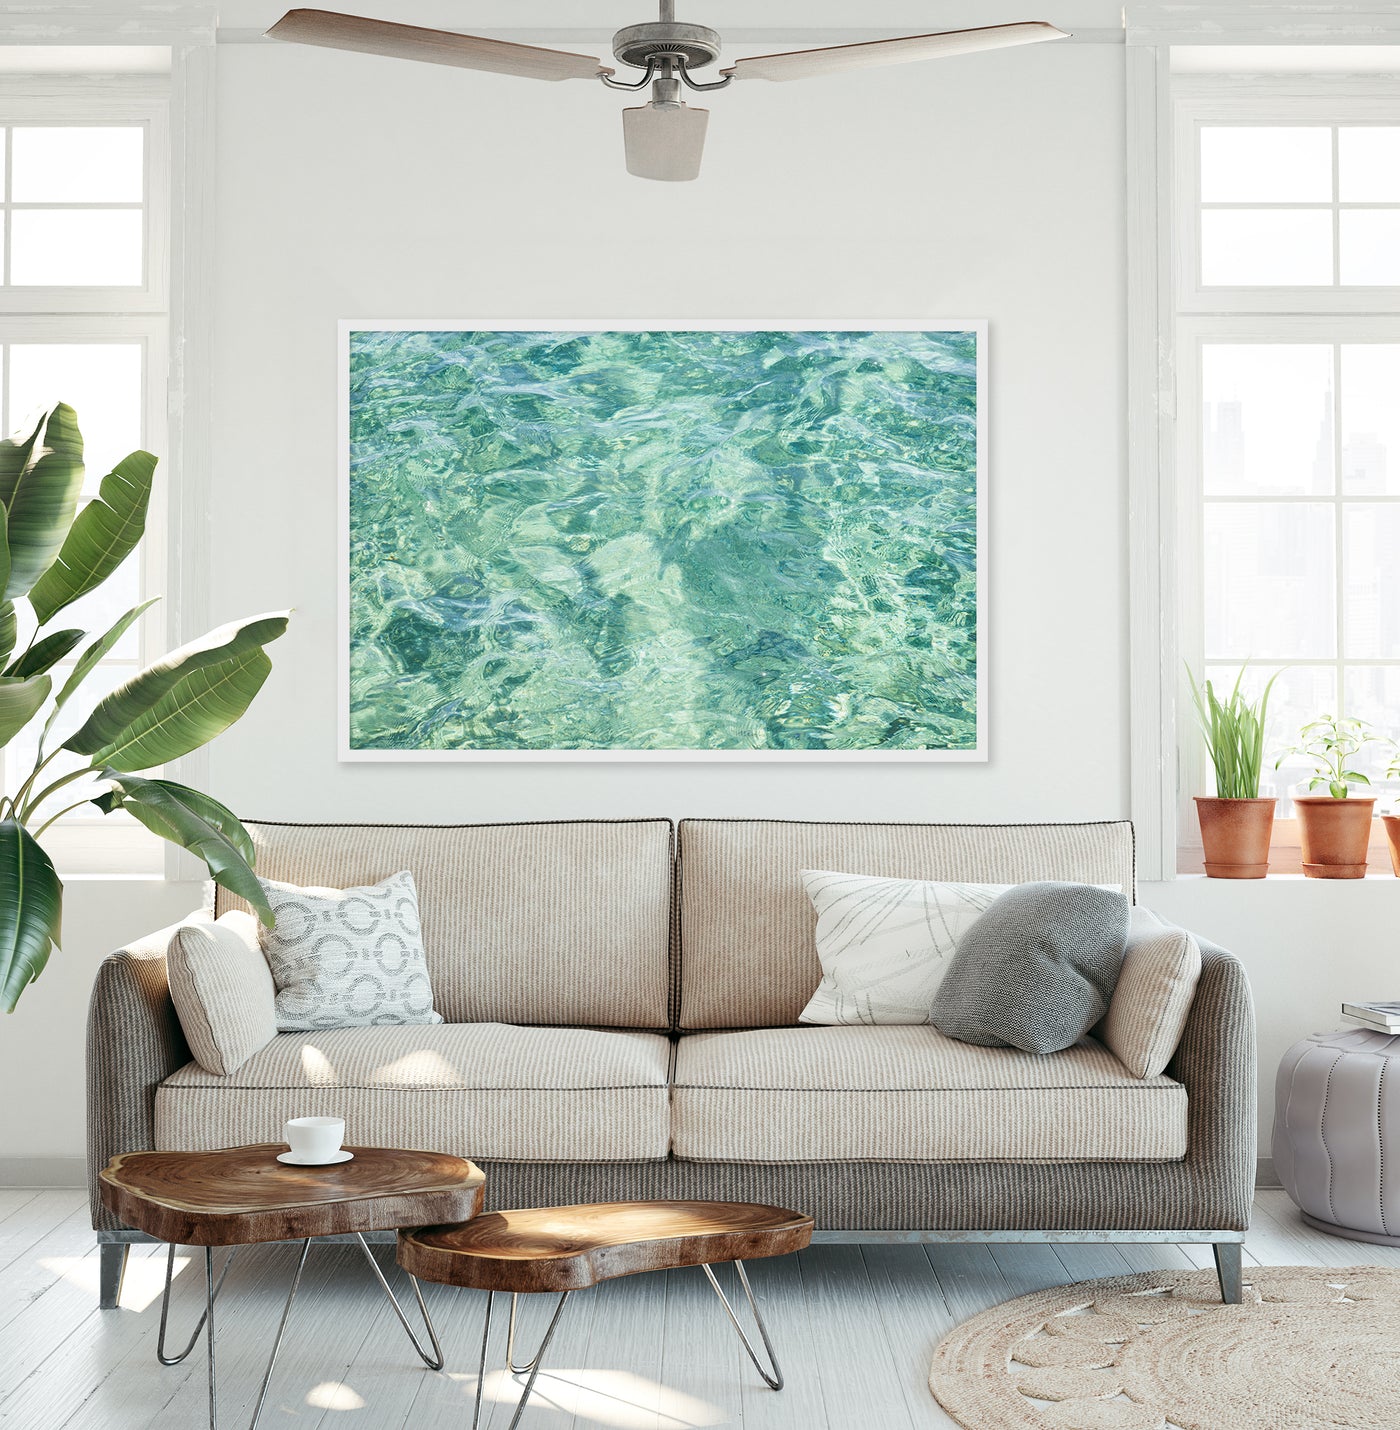 Abstract Water - Large fine art print by Cattie Coyle Photography above couch in living room